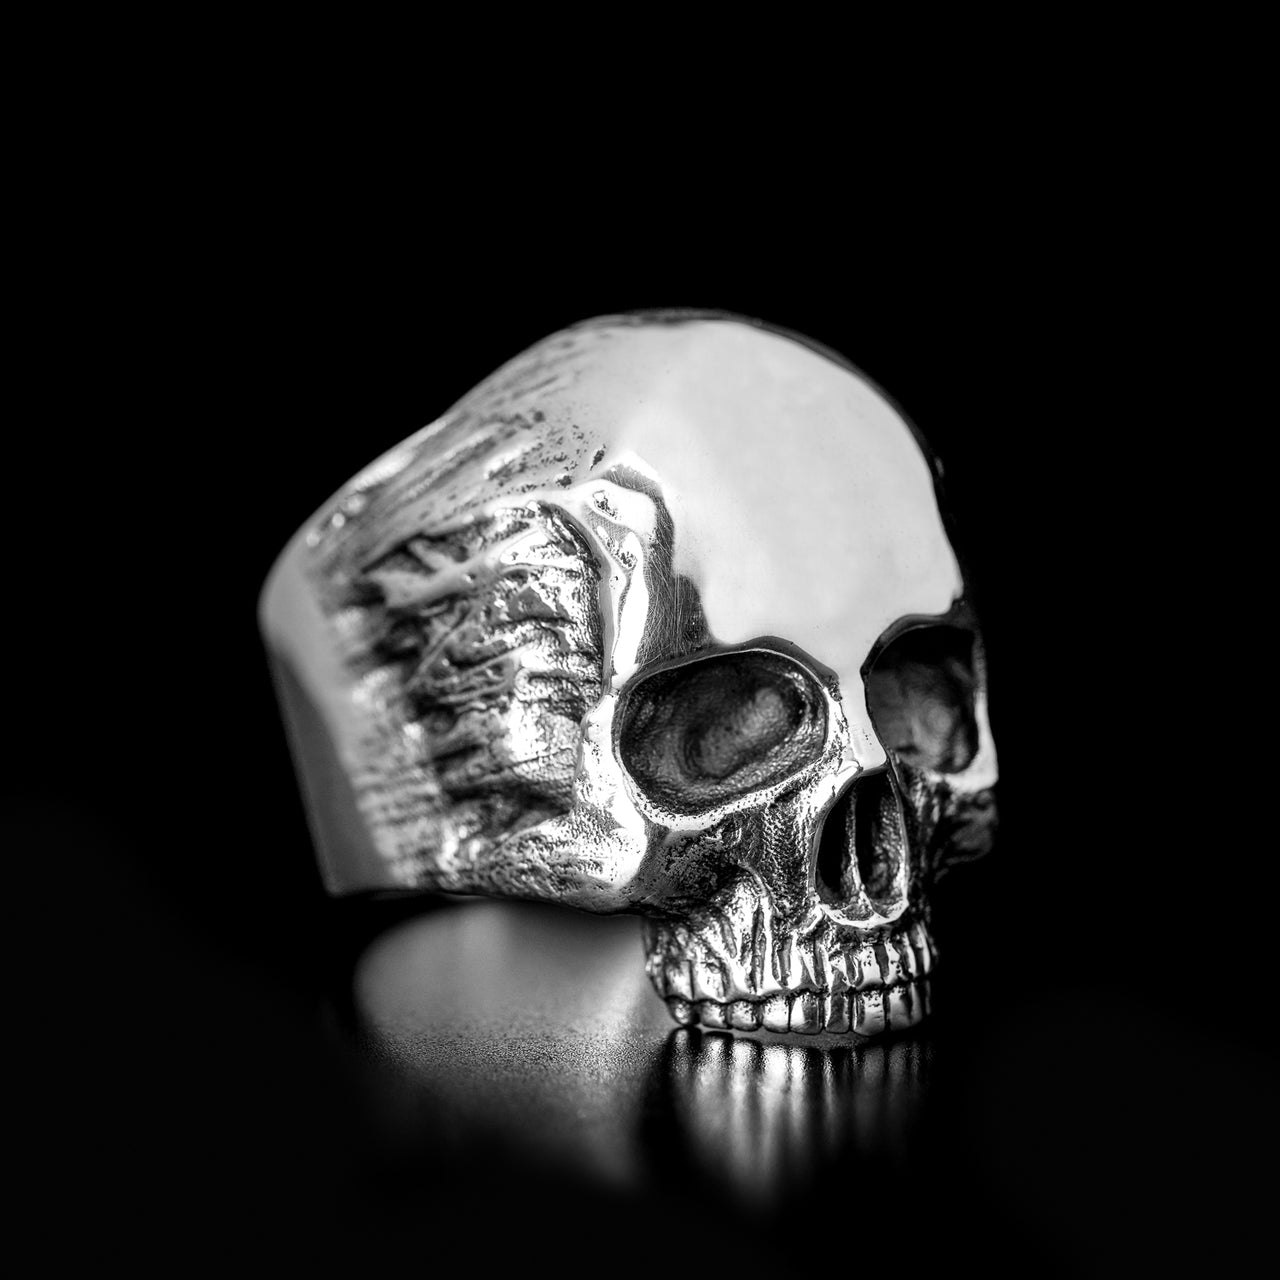 Sterling Silver Gothic Skull Ring - Black Feather Design